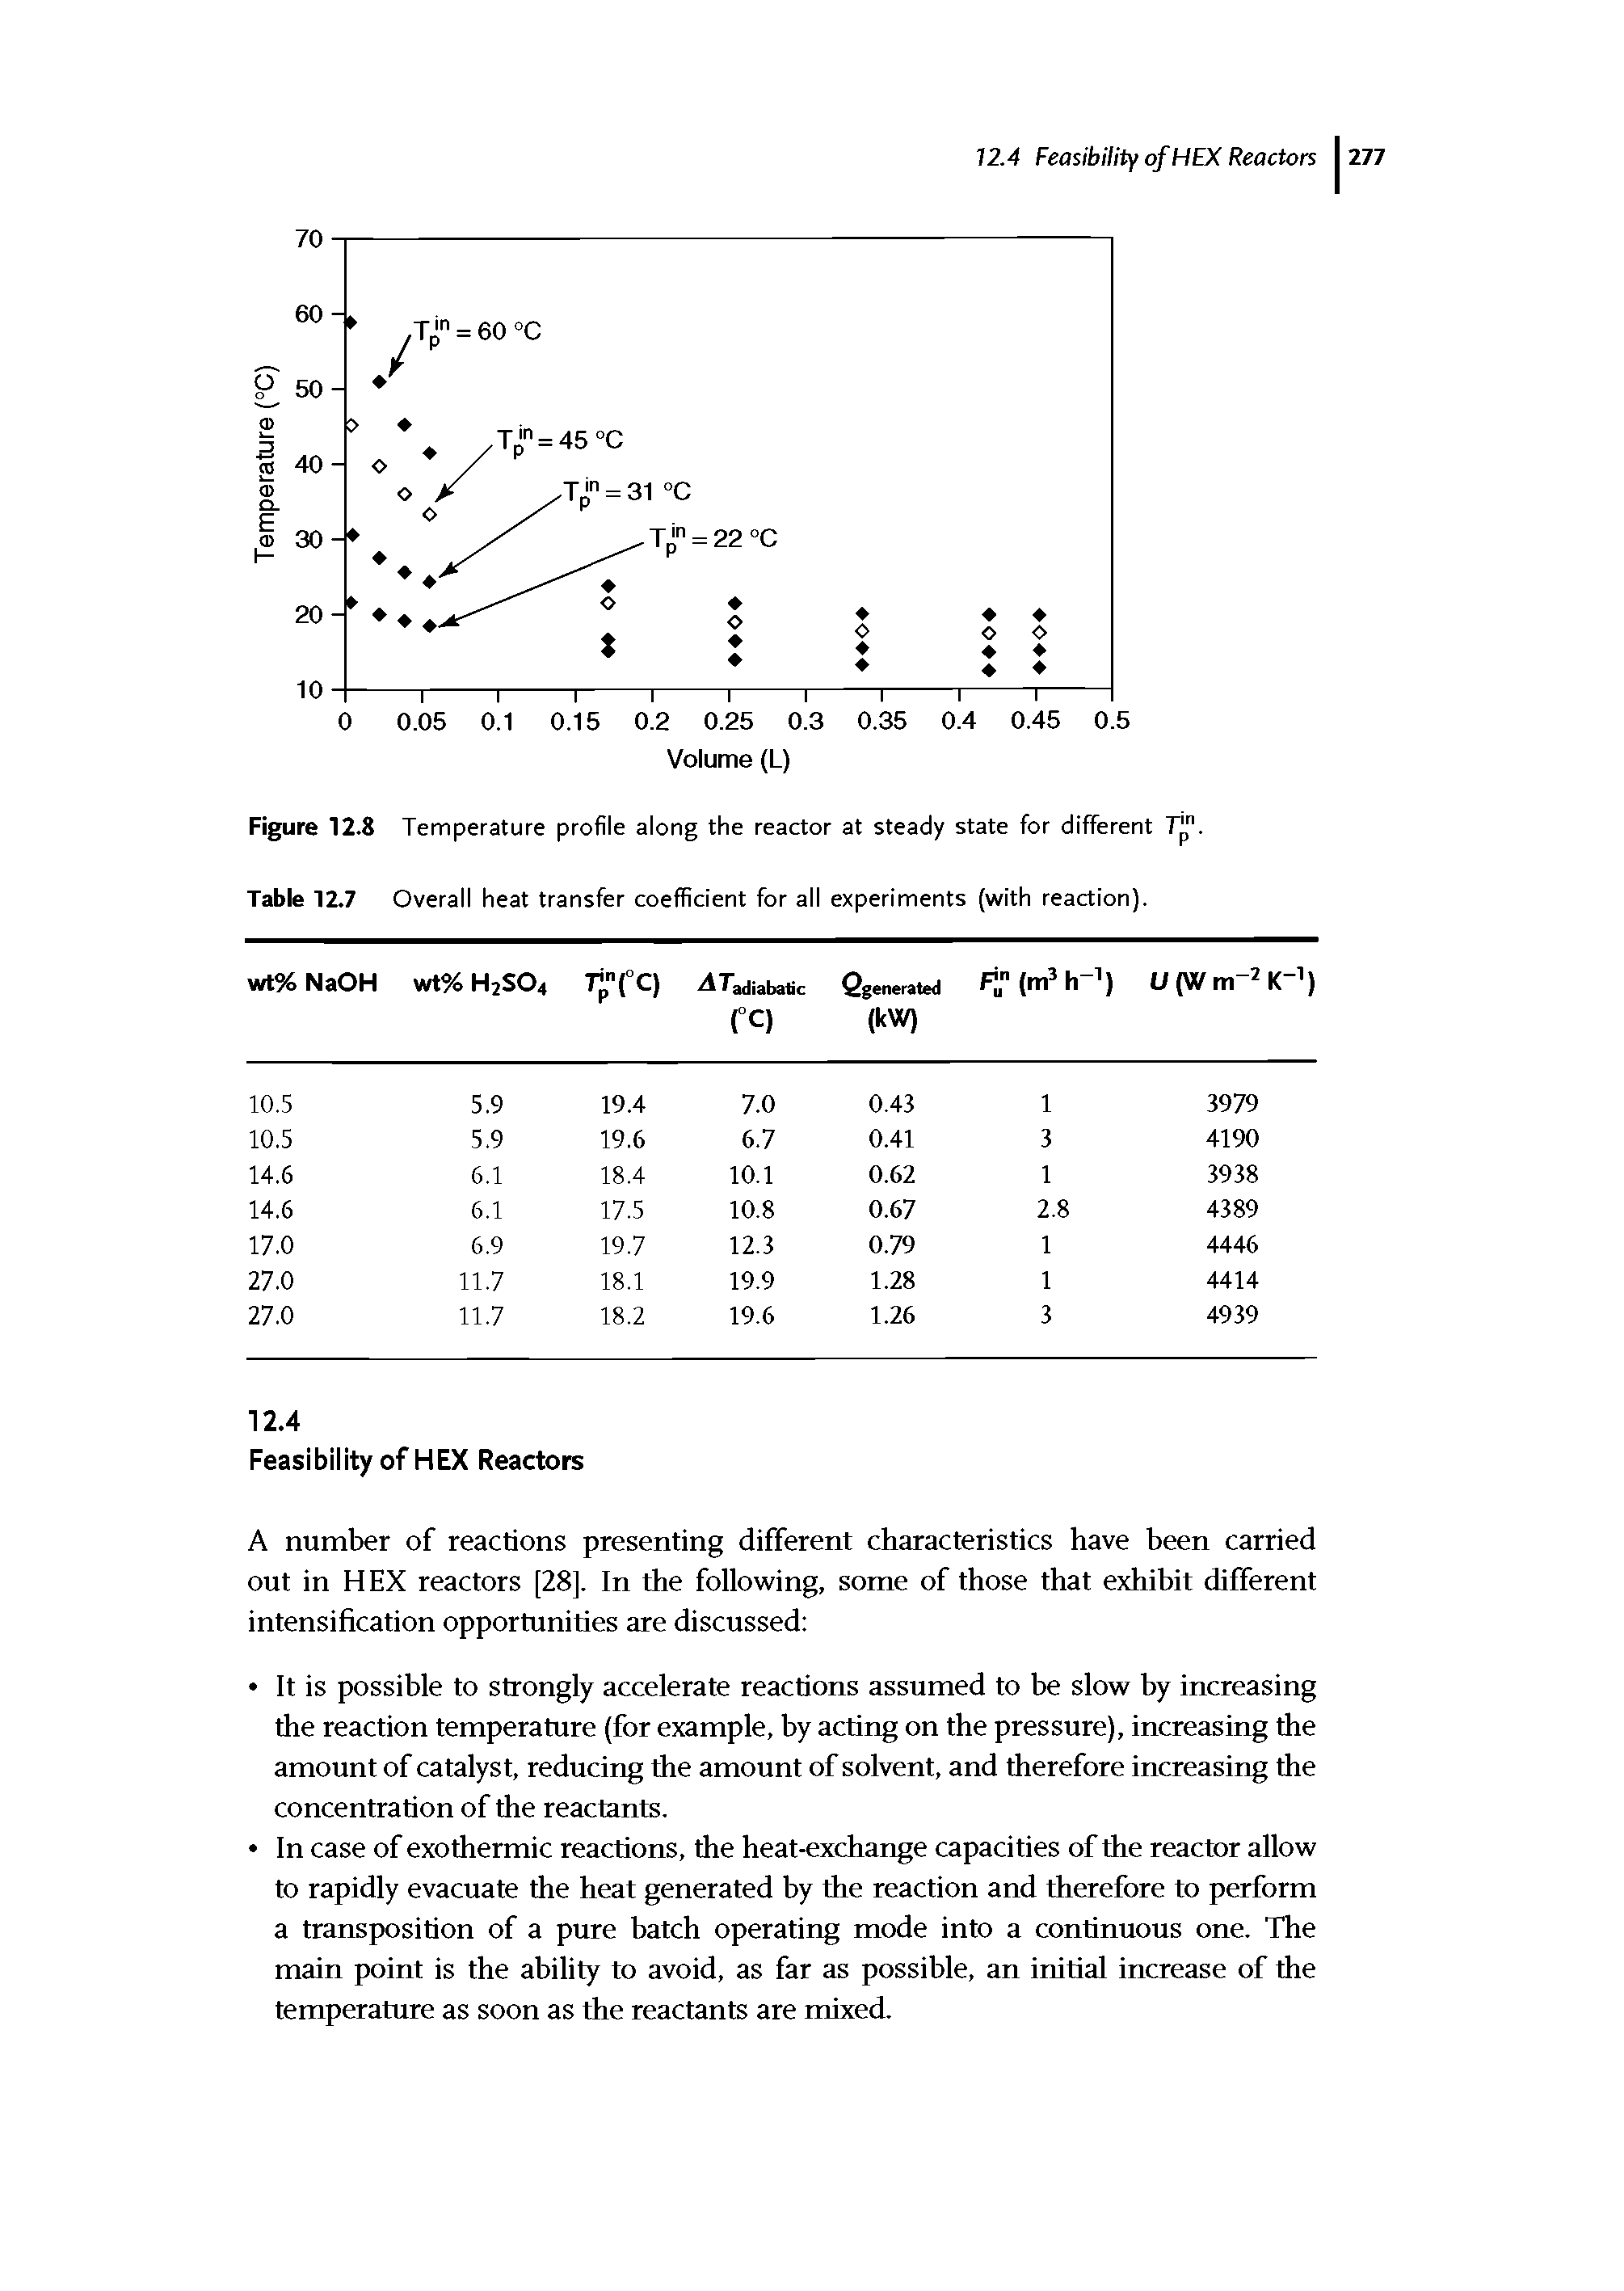 Figure 12.8 Temperature profile along the reactor at steady state for different 1. Table 12.7 Overall heat transfer coefficient for all experiments (with reaction).